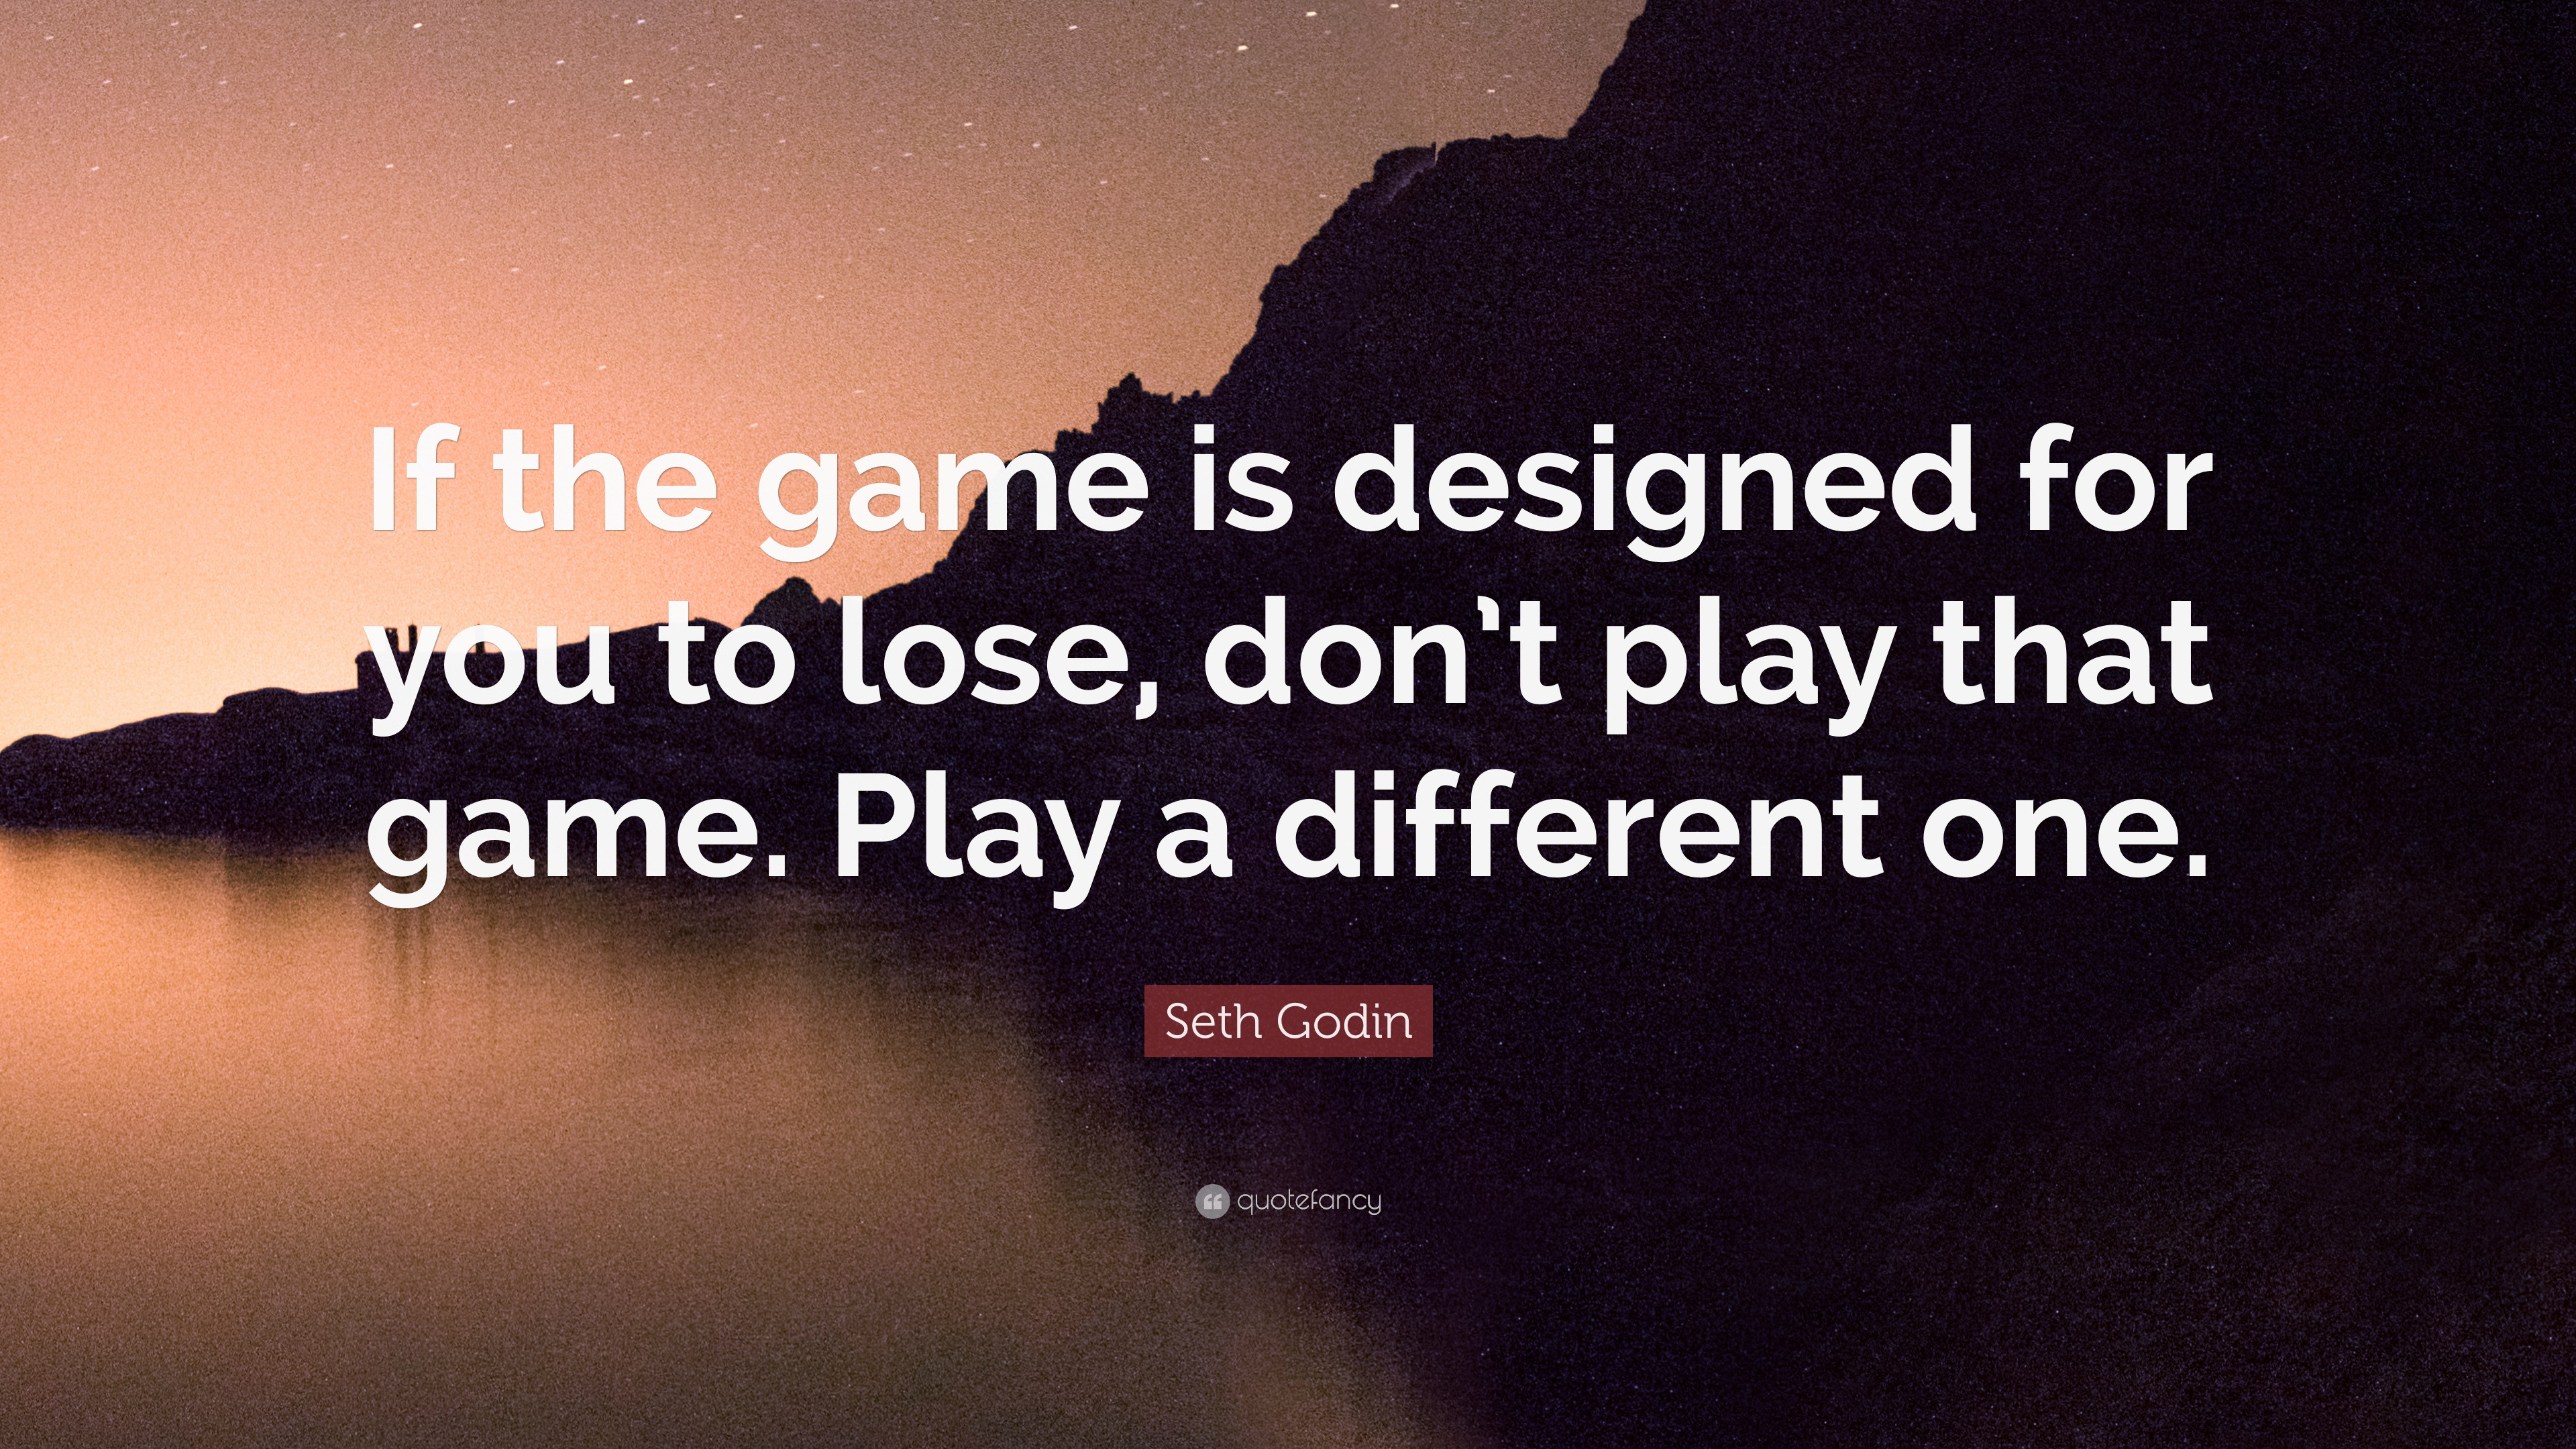 Seth Godin Quote: “If the game is designed for you to lose, don’t play